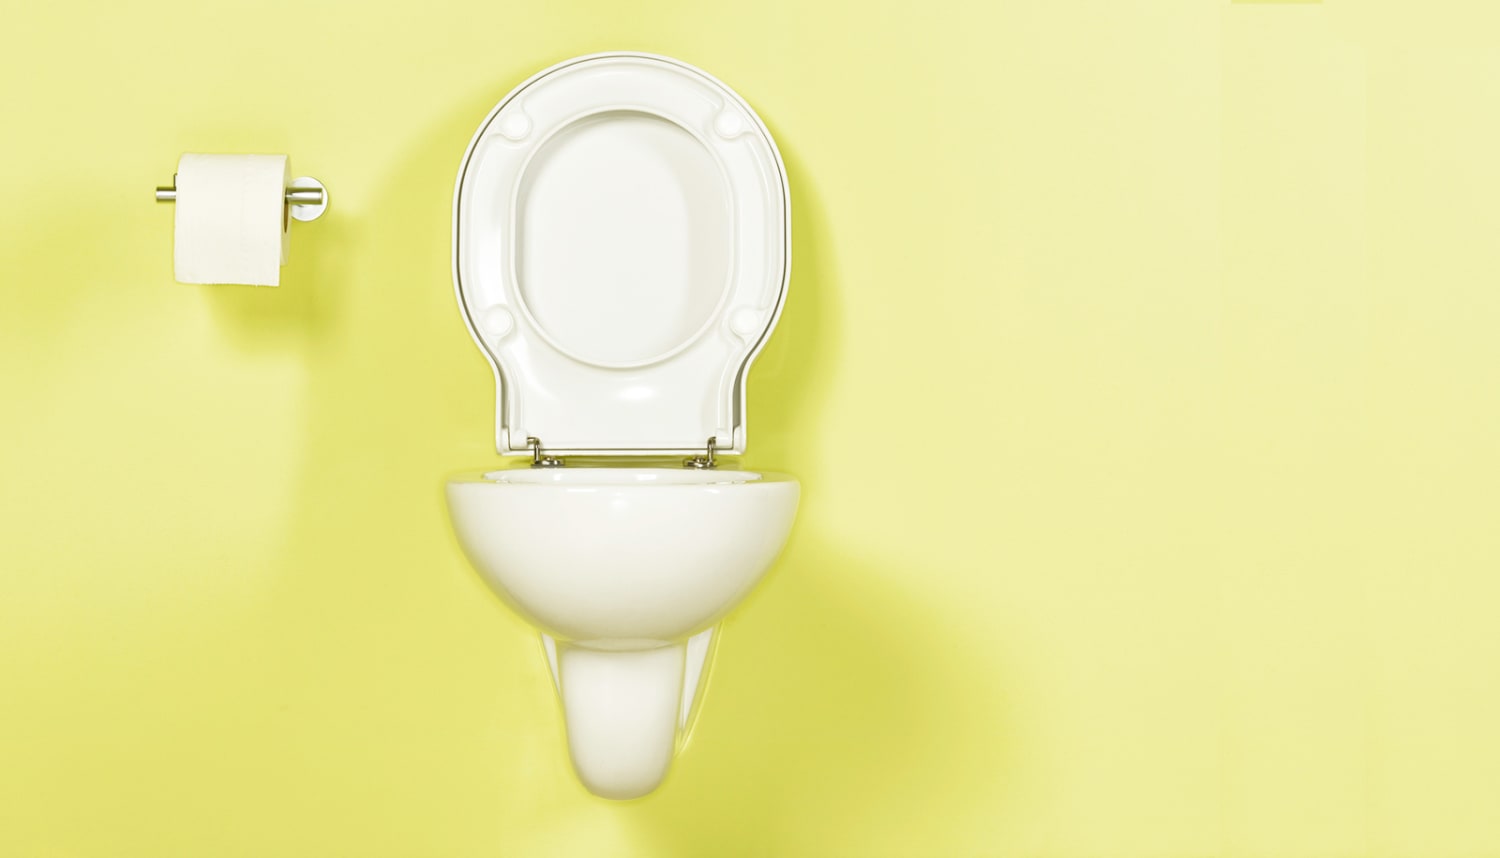 Website offers tips and tricks to fix a leaky bladder